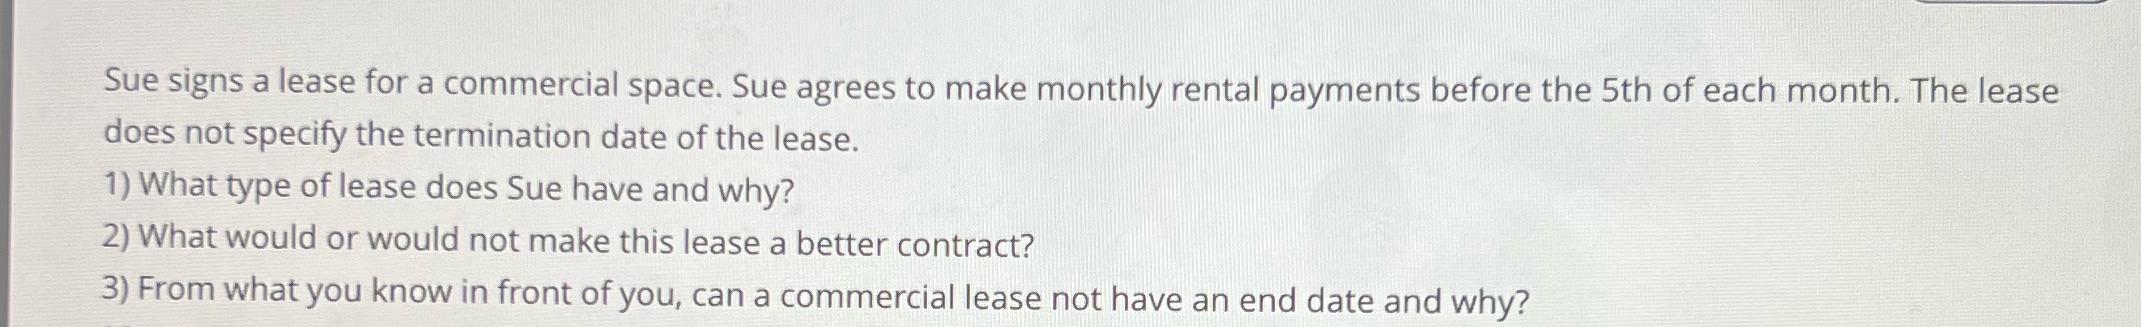 Sue signs a lease for a commercial space. Sue agrees to make monthly rental payments before the 5th of each